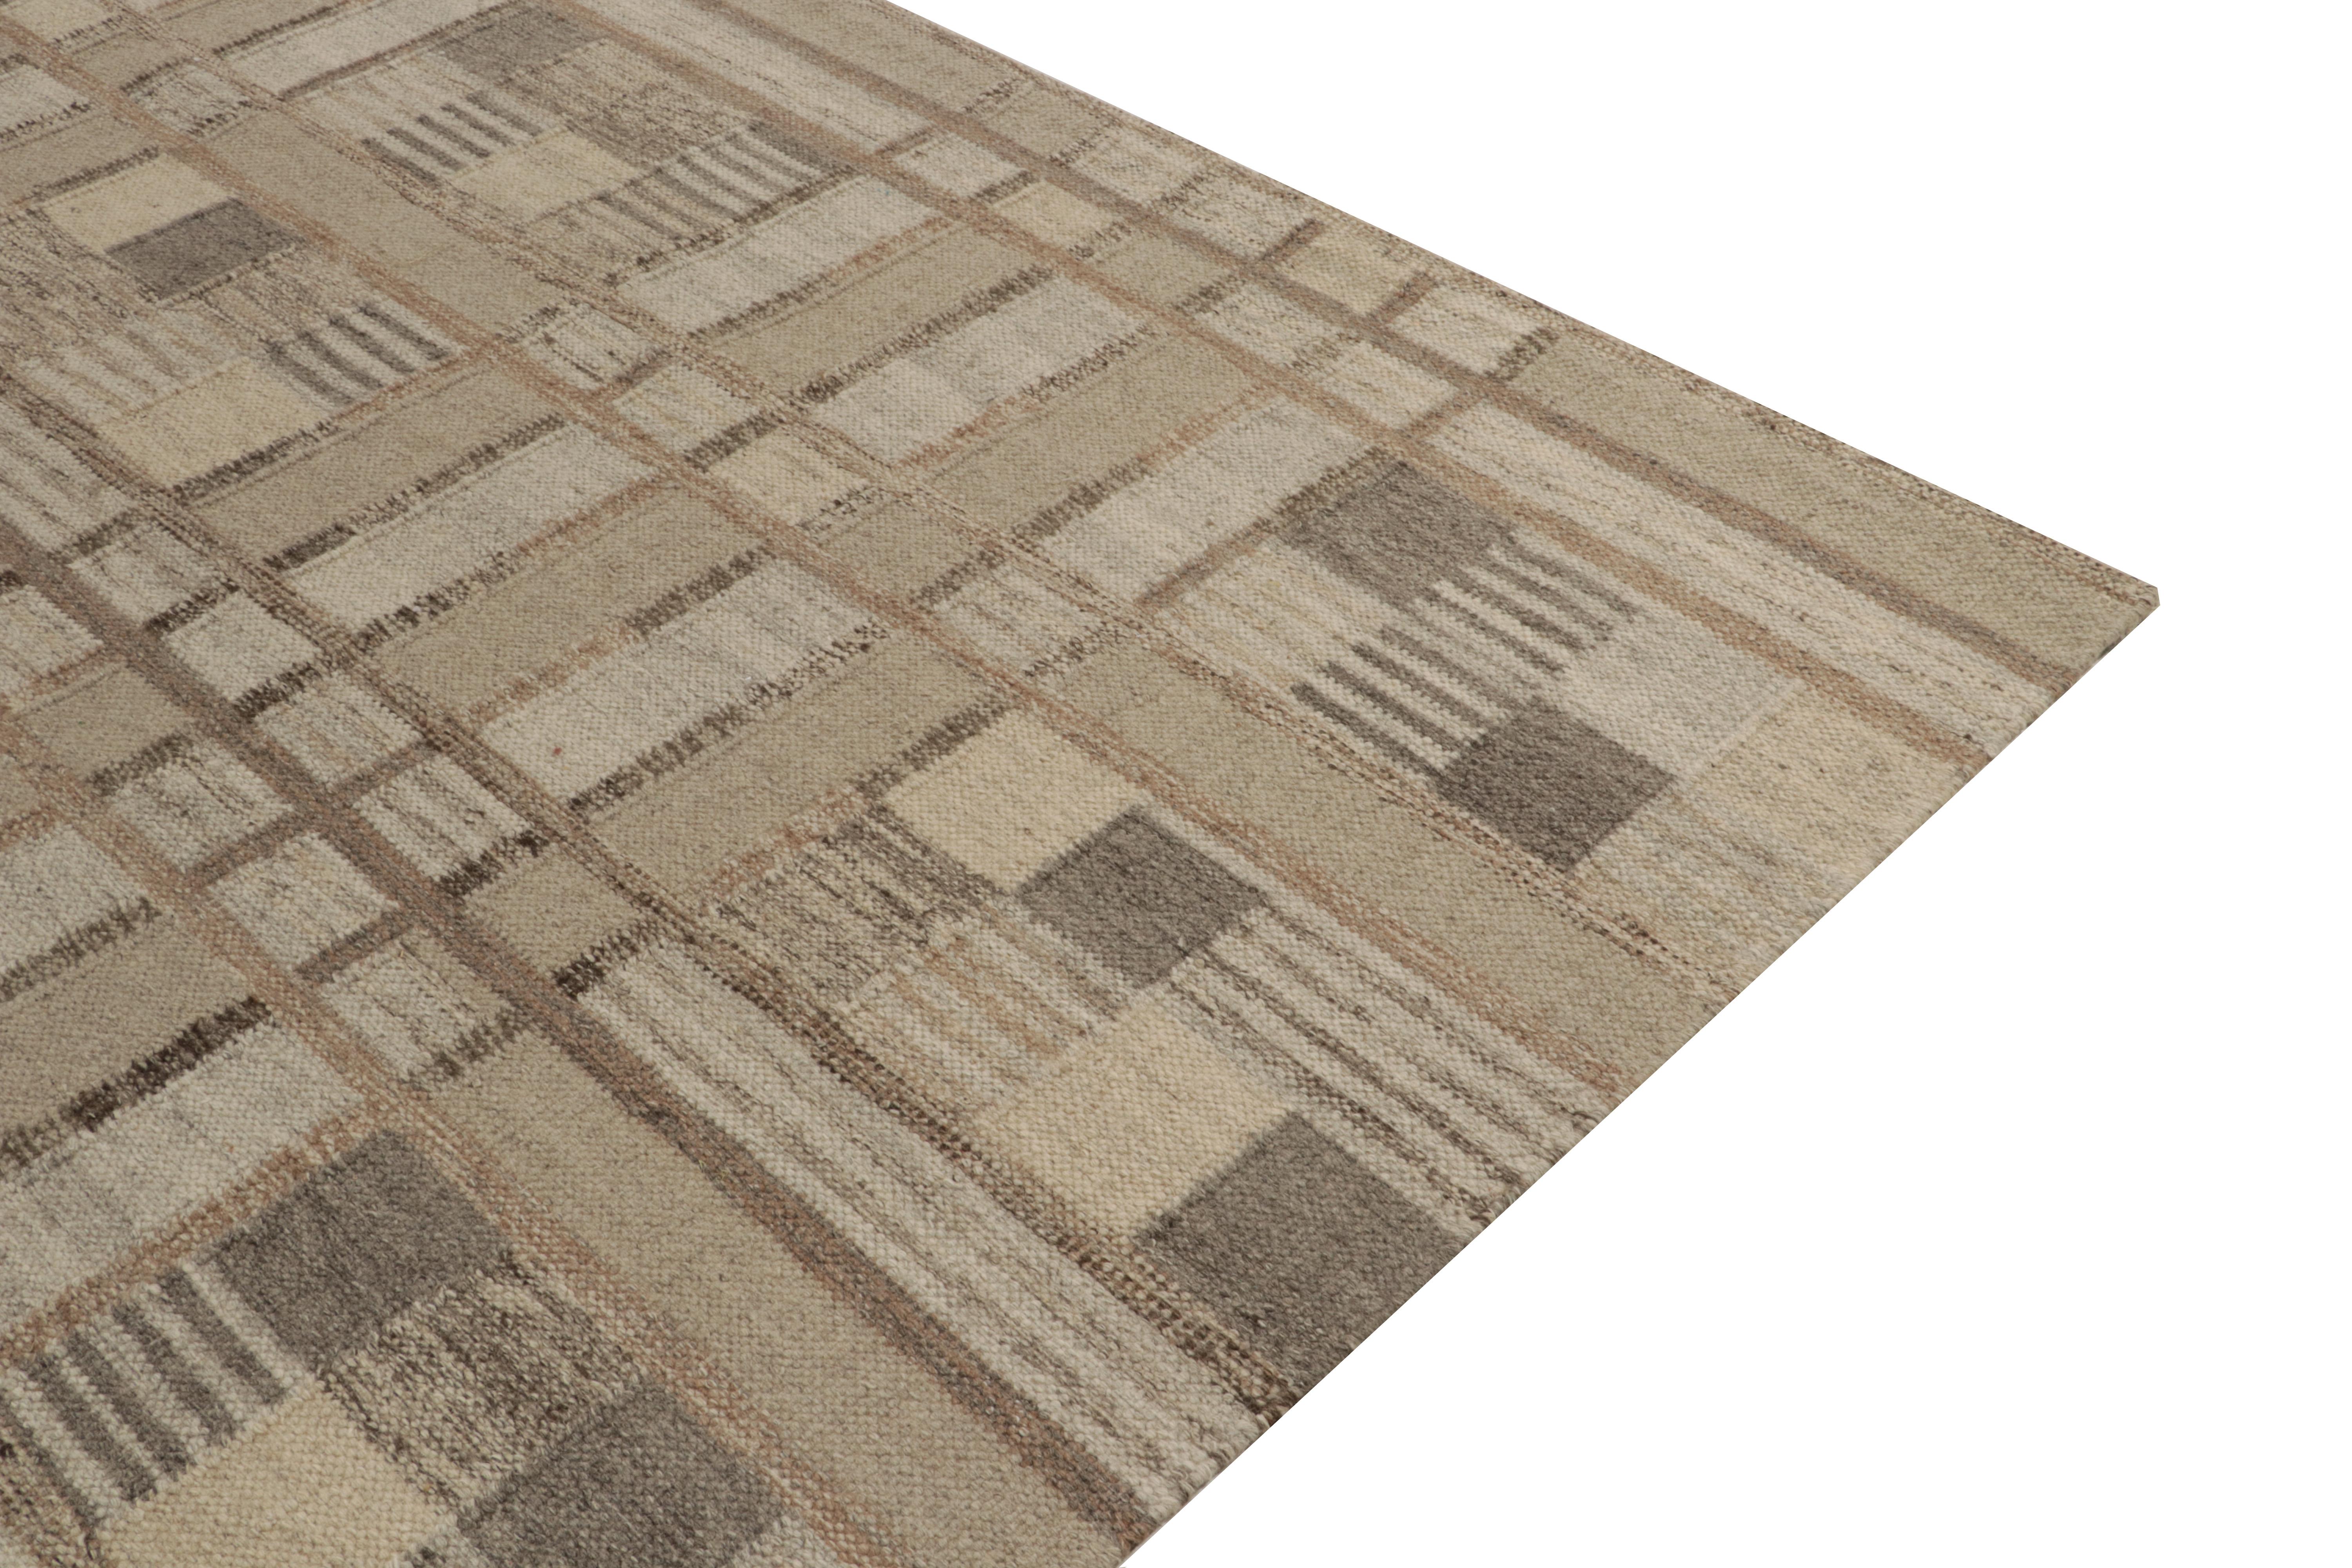 Hand-Knotted Rug & Kilim's Scandinavian Style Kilim Rug, Beige-Brown, Gray Geometric Pattern For Sale